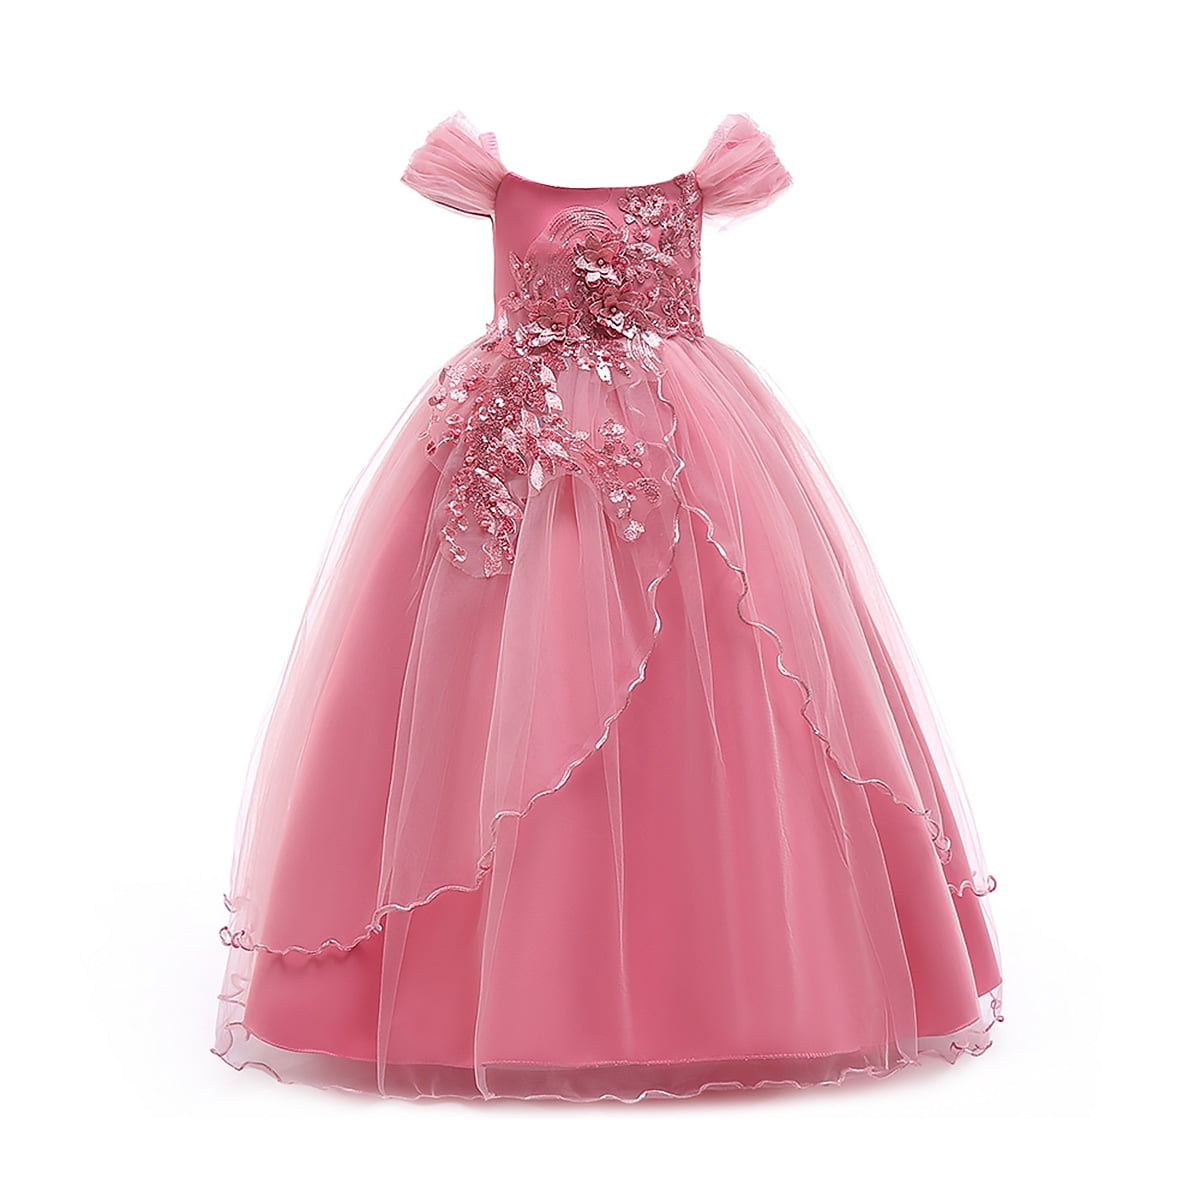 OBEEII Flower Girls Dresses Floral Lace Splicing Sleeveless Formal Dress Princess Tulle Long Dress up for First Communion Wedding Bridesmaid Birthday Evening Party Prom Dance Ball Gown 4-14 Years 